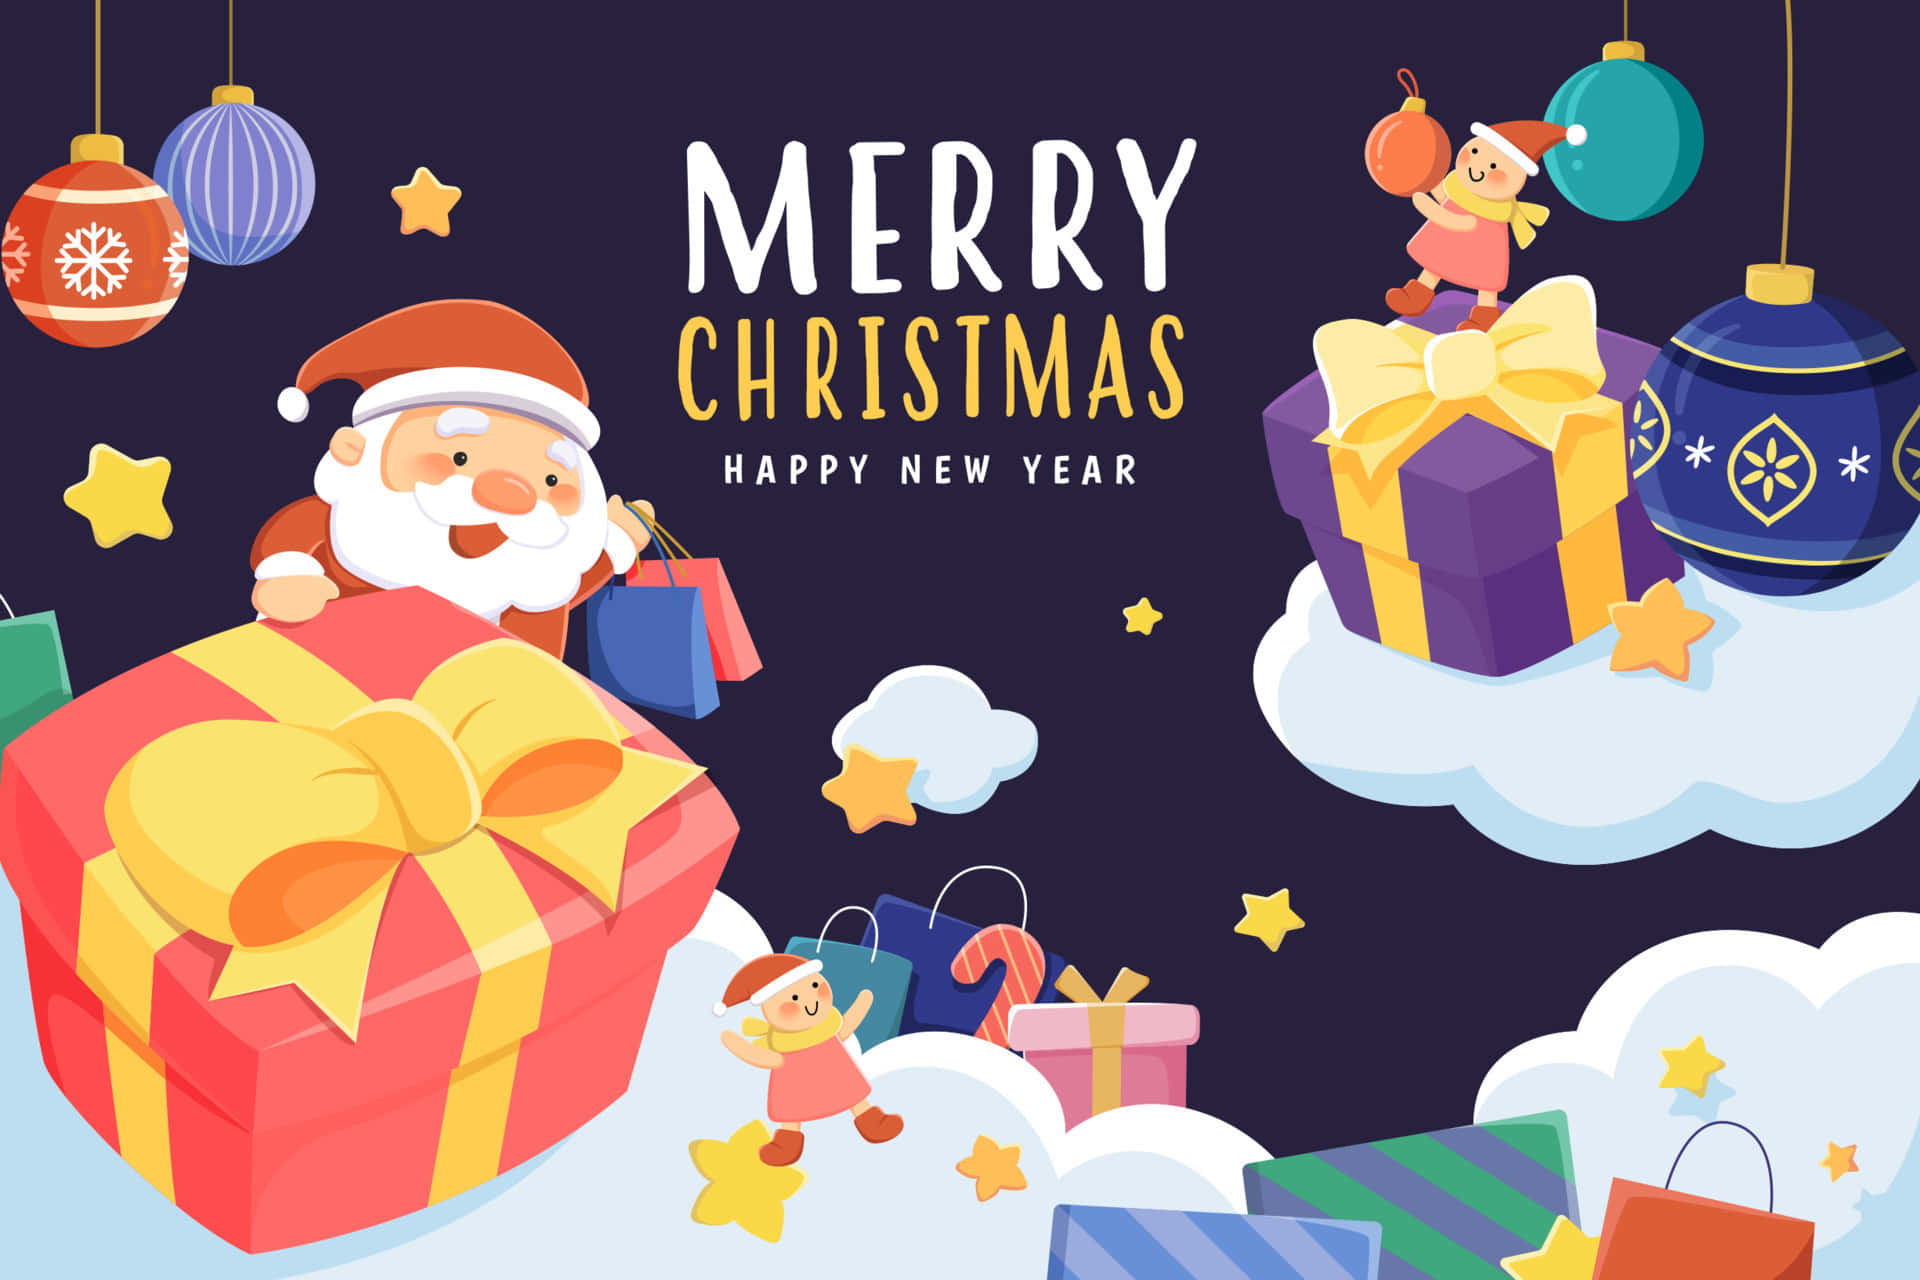 Greeting Card With Christmas Elves, Santa, And Gifts Wallpaper